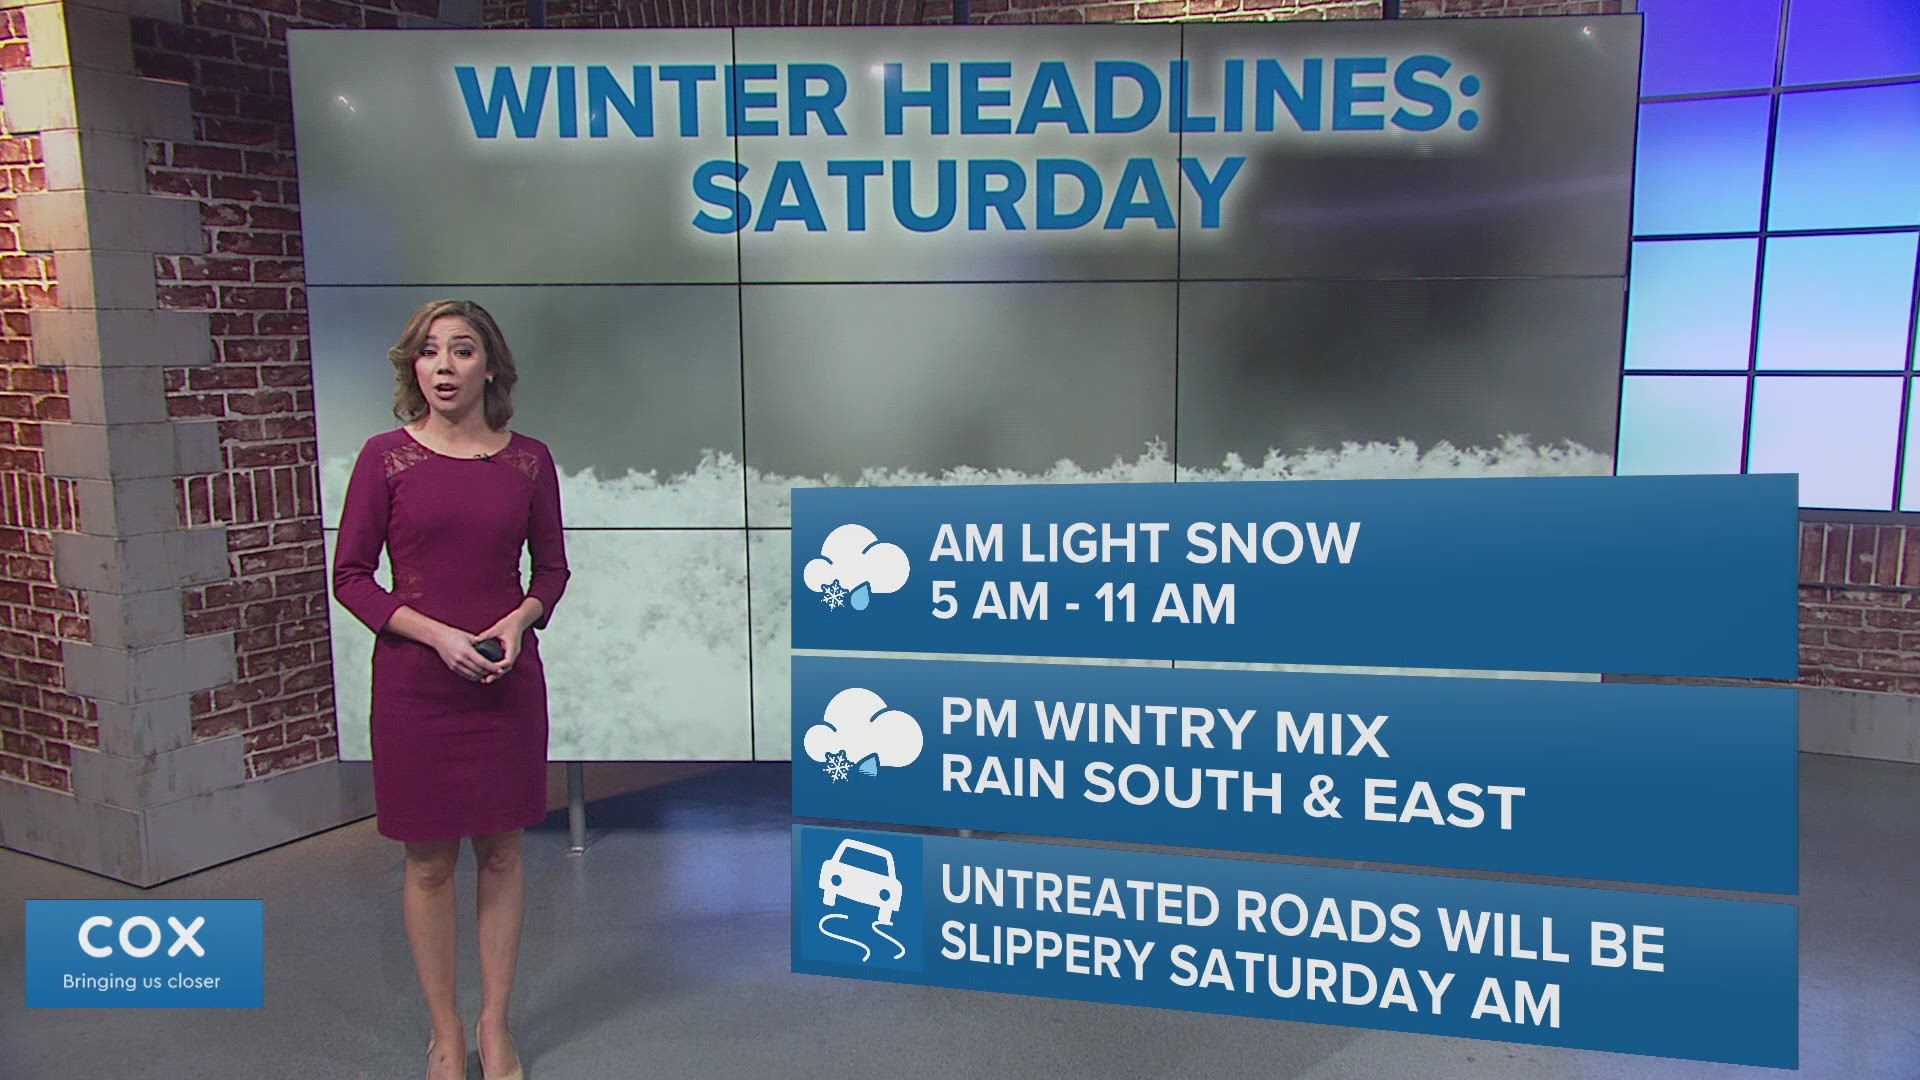 A snow and rain mix with cold temperatures is expected to cause icy and slippery conditions on the road.